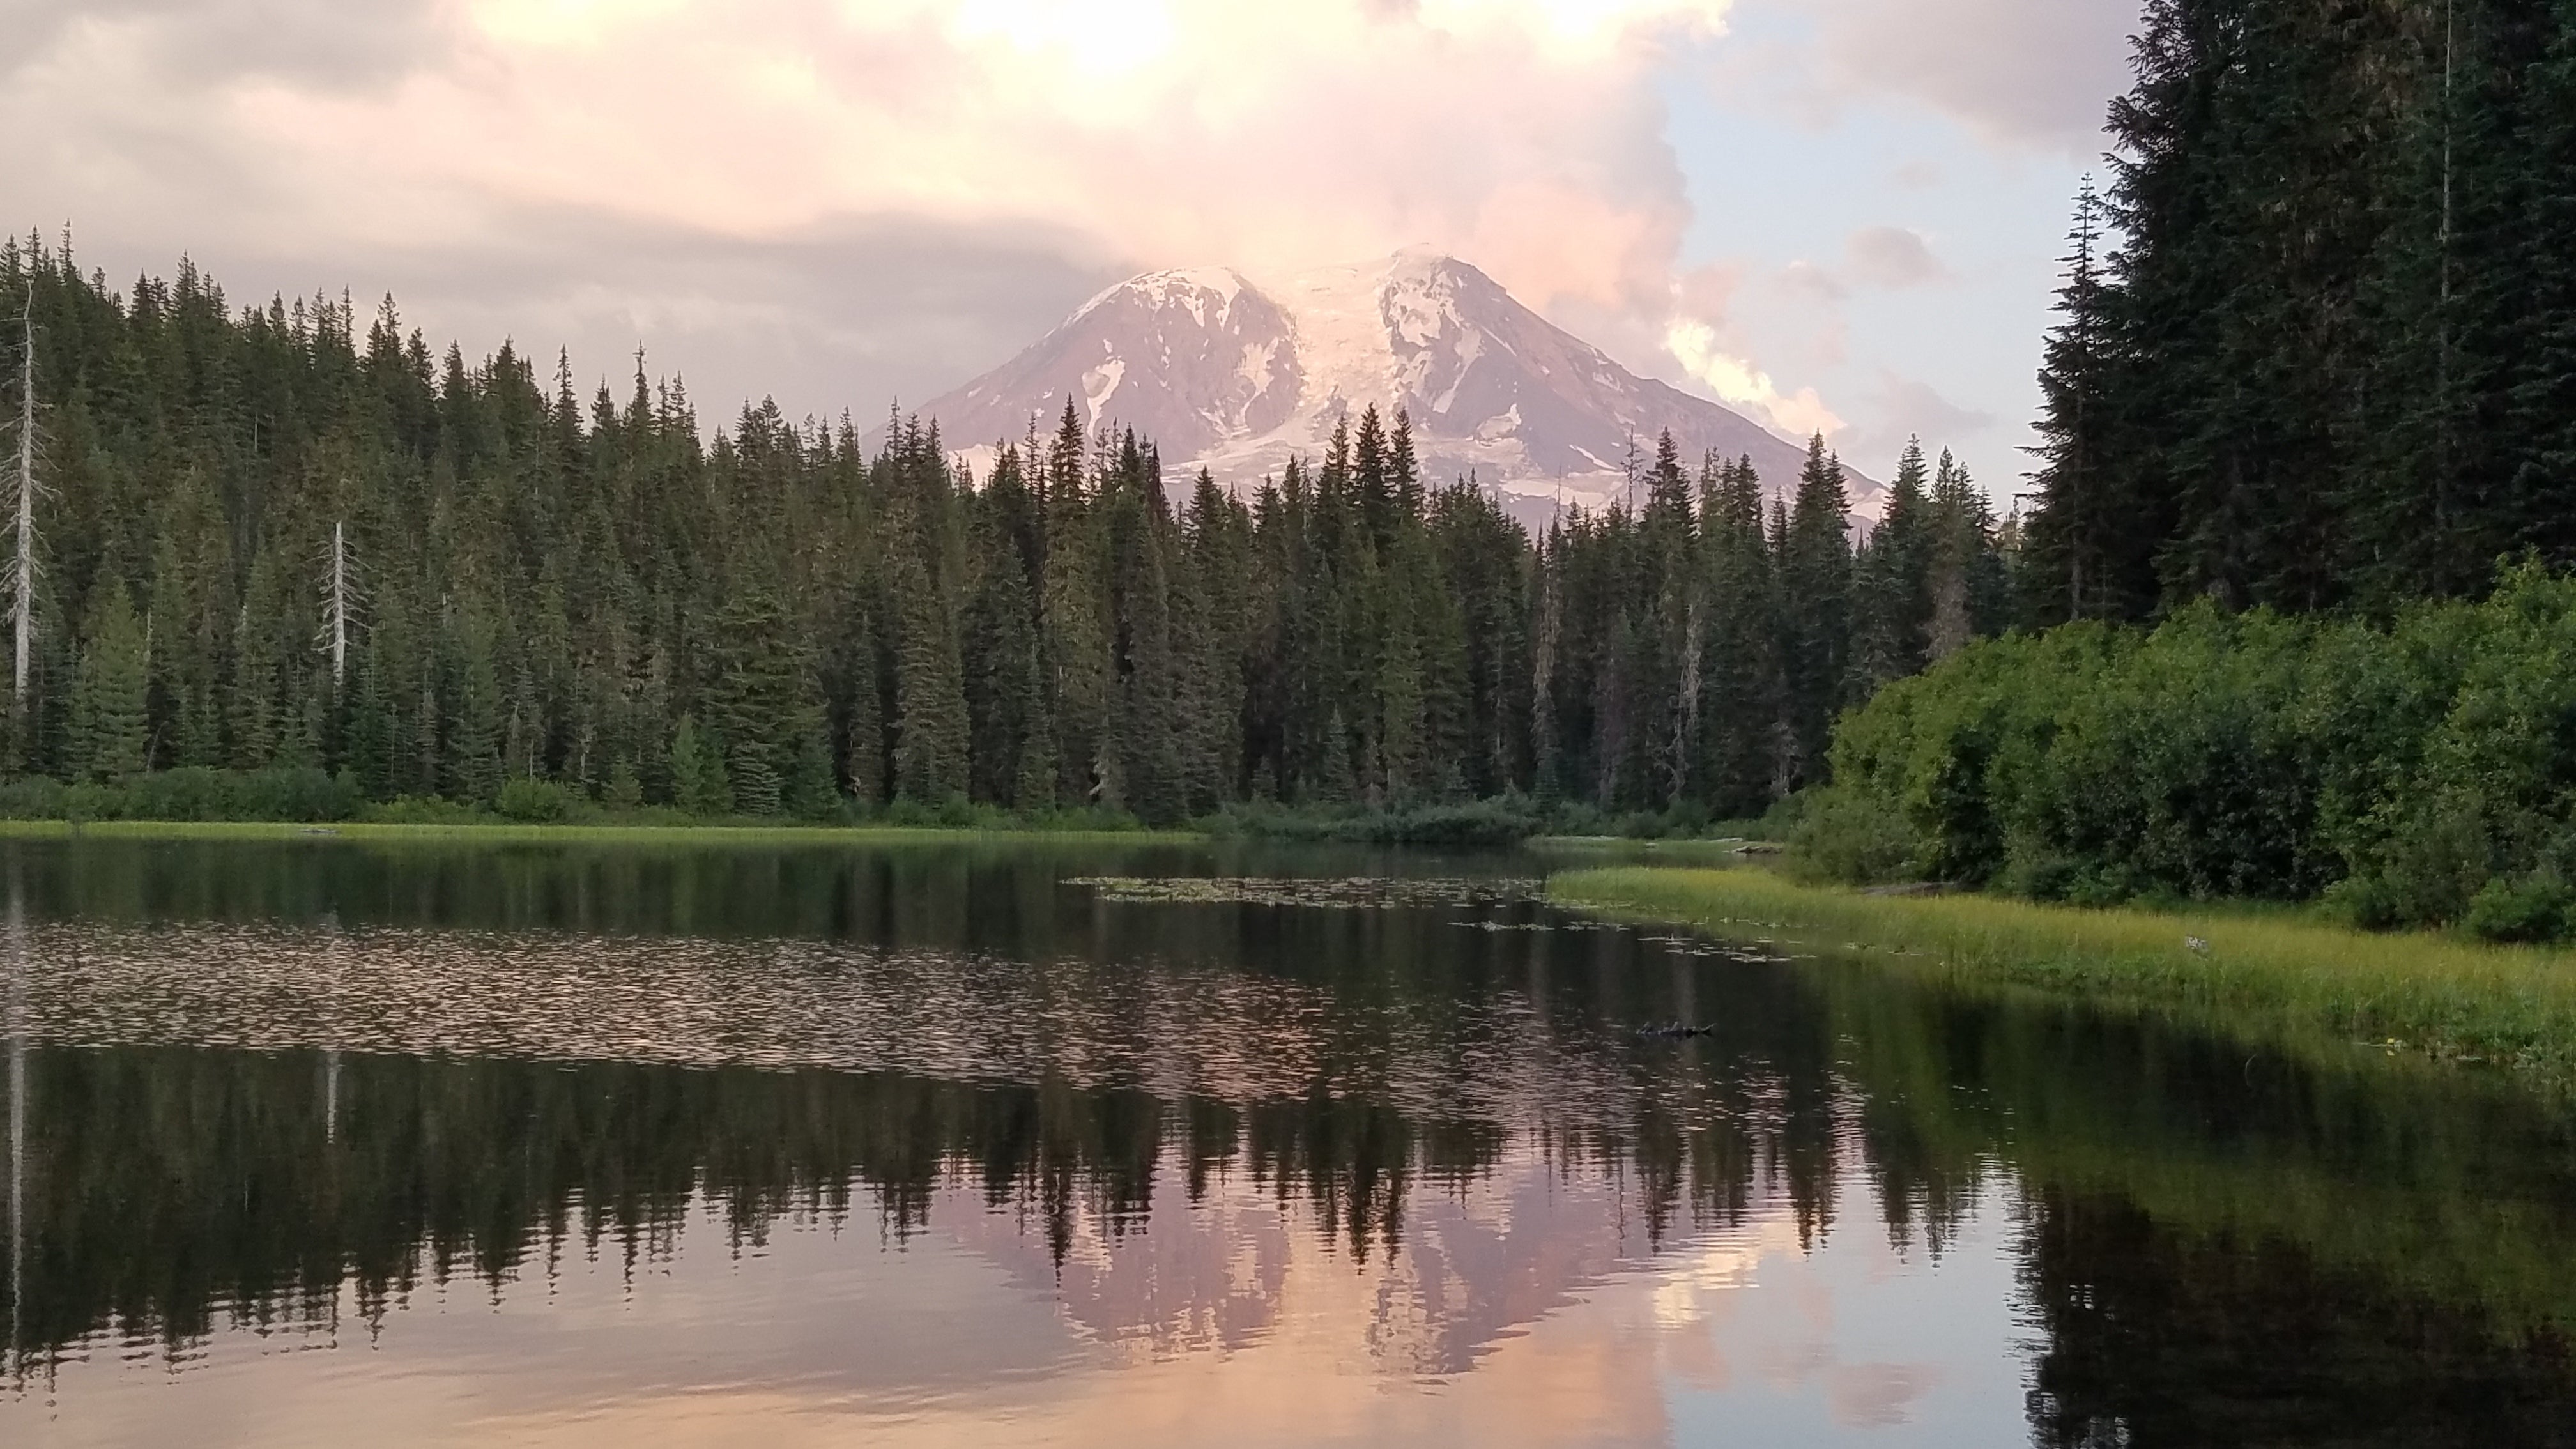 Camper submitted image from Olallie Lake - 2